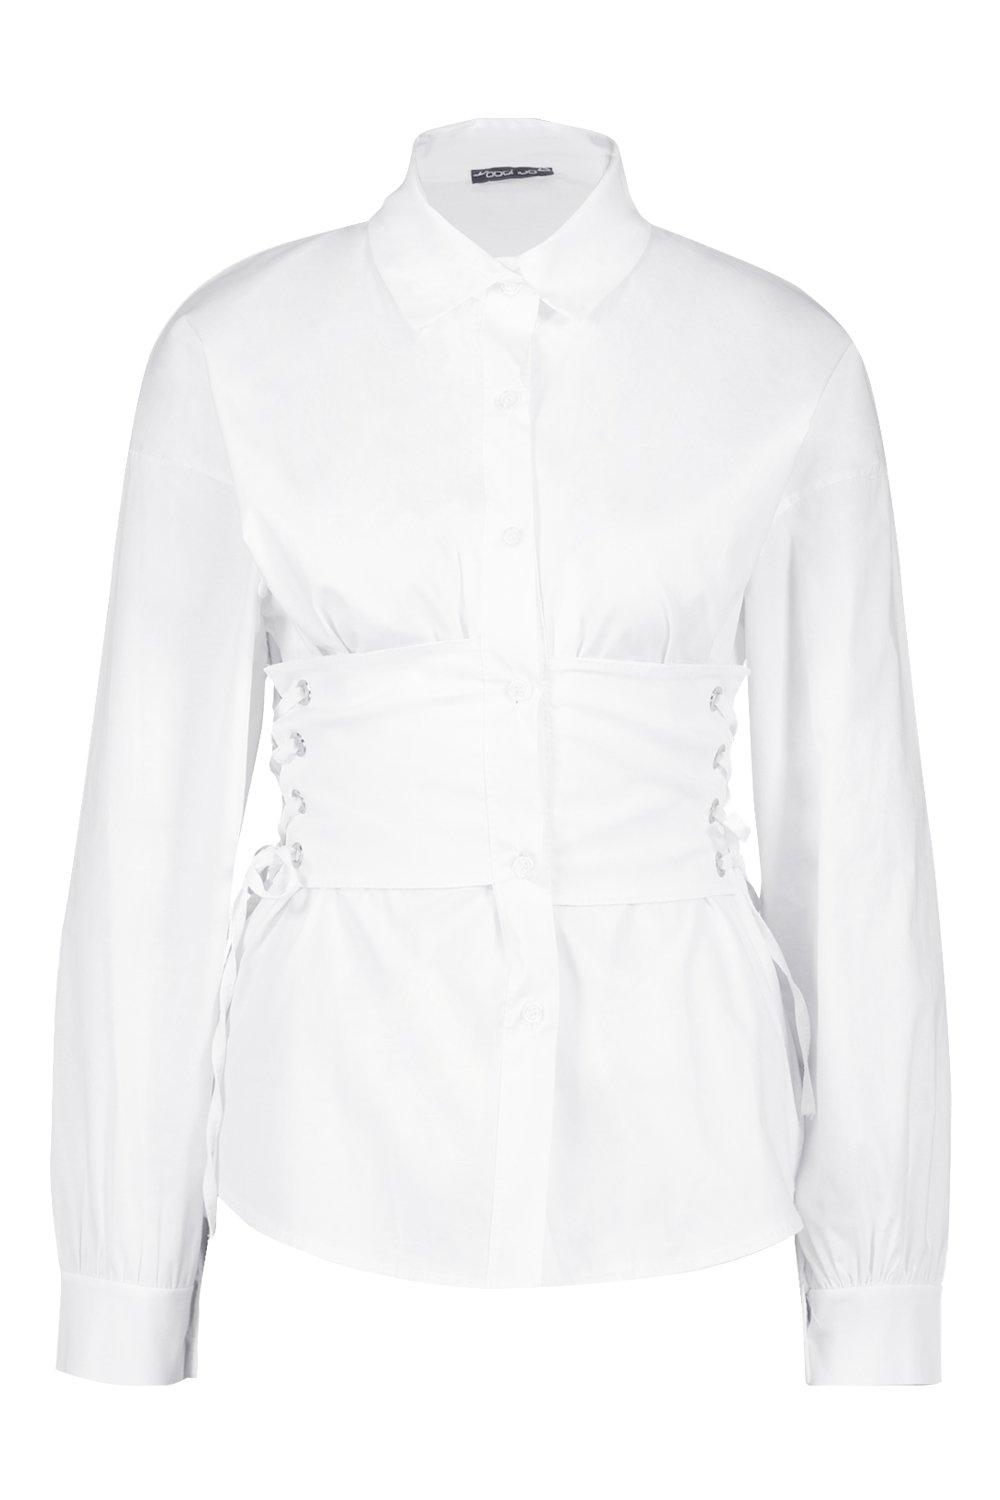 In The Style corset detail oversized shirt in white